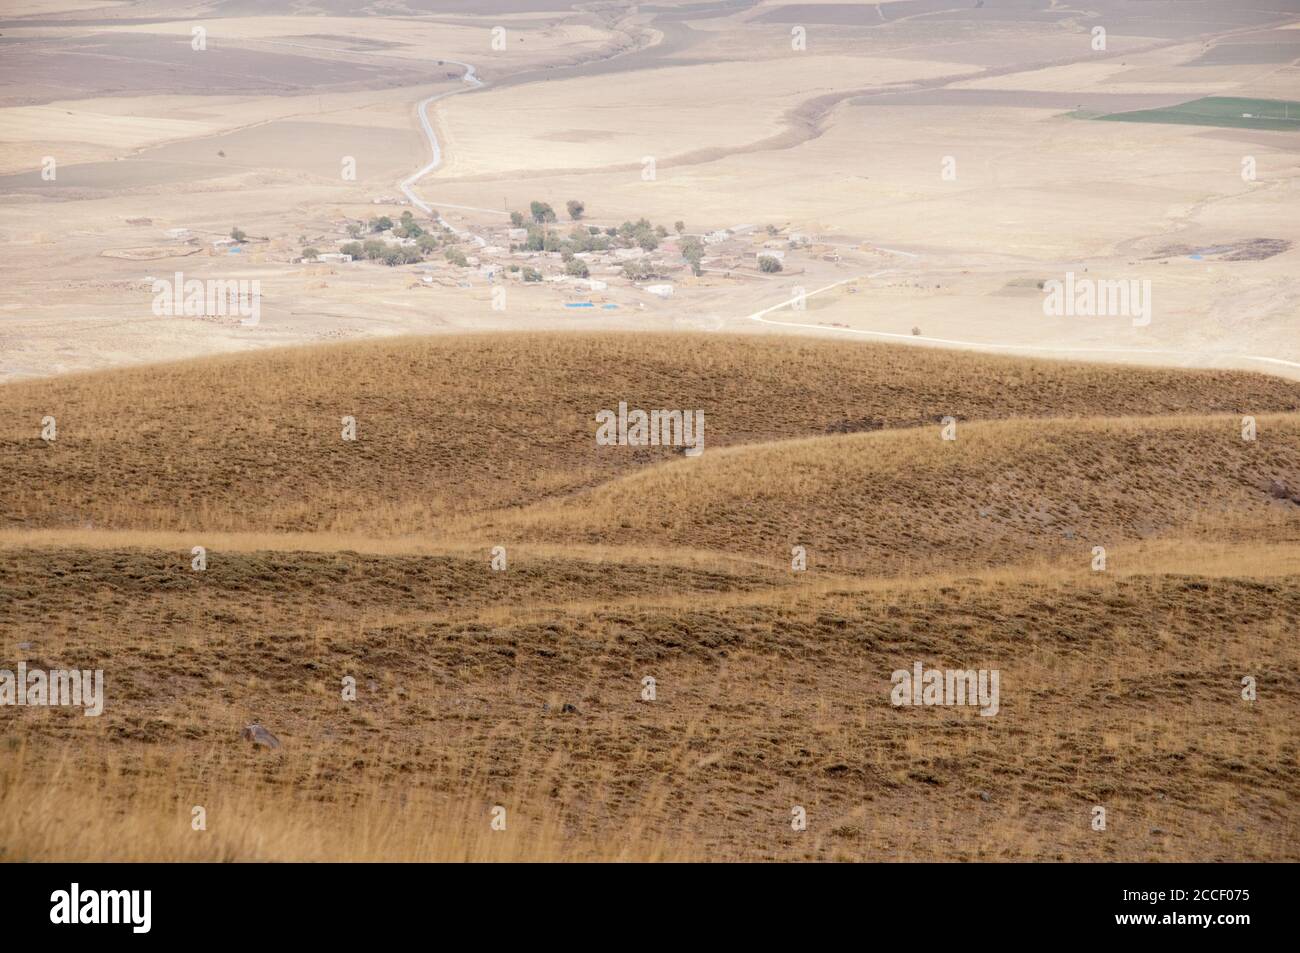 Looking down at a Turkish village from the slopes of Mount Nemrut, near the city of Tatvan, in the eastern Anatolia region, southeastern Turkey. Stock Photo